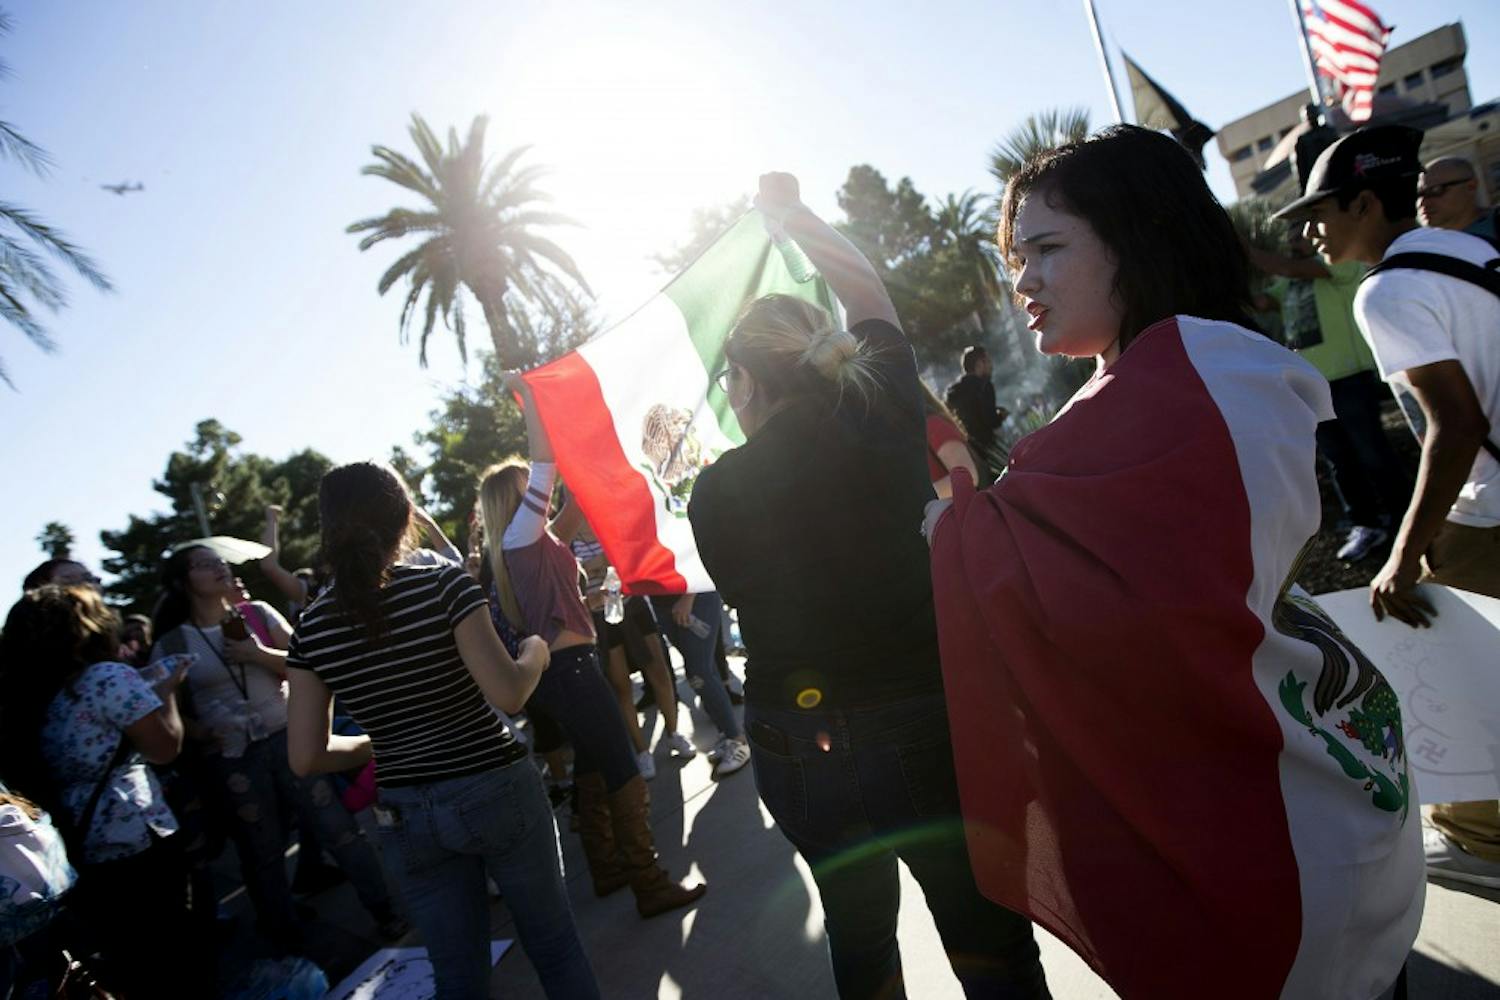 Students from the Phoenix Union School District arrive at the Arizona State Capital lawn on Wednesday, Nov. 9, 2016, in protest of the 2016 presidential election results. 